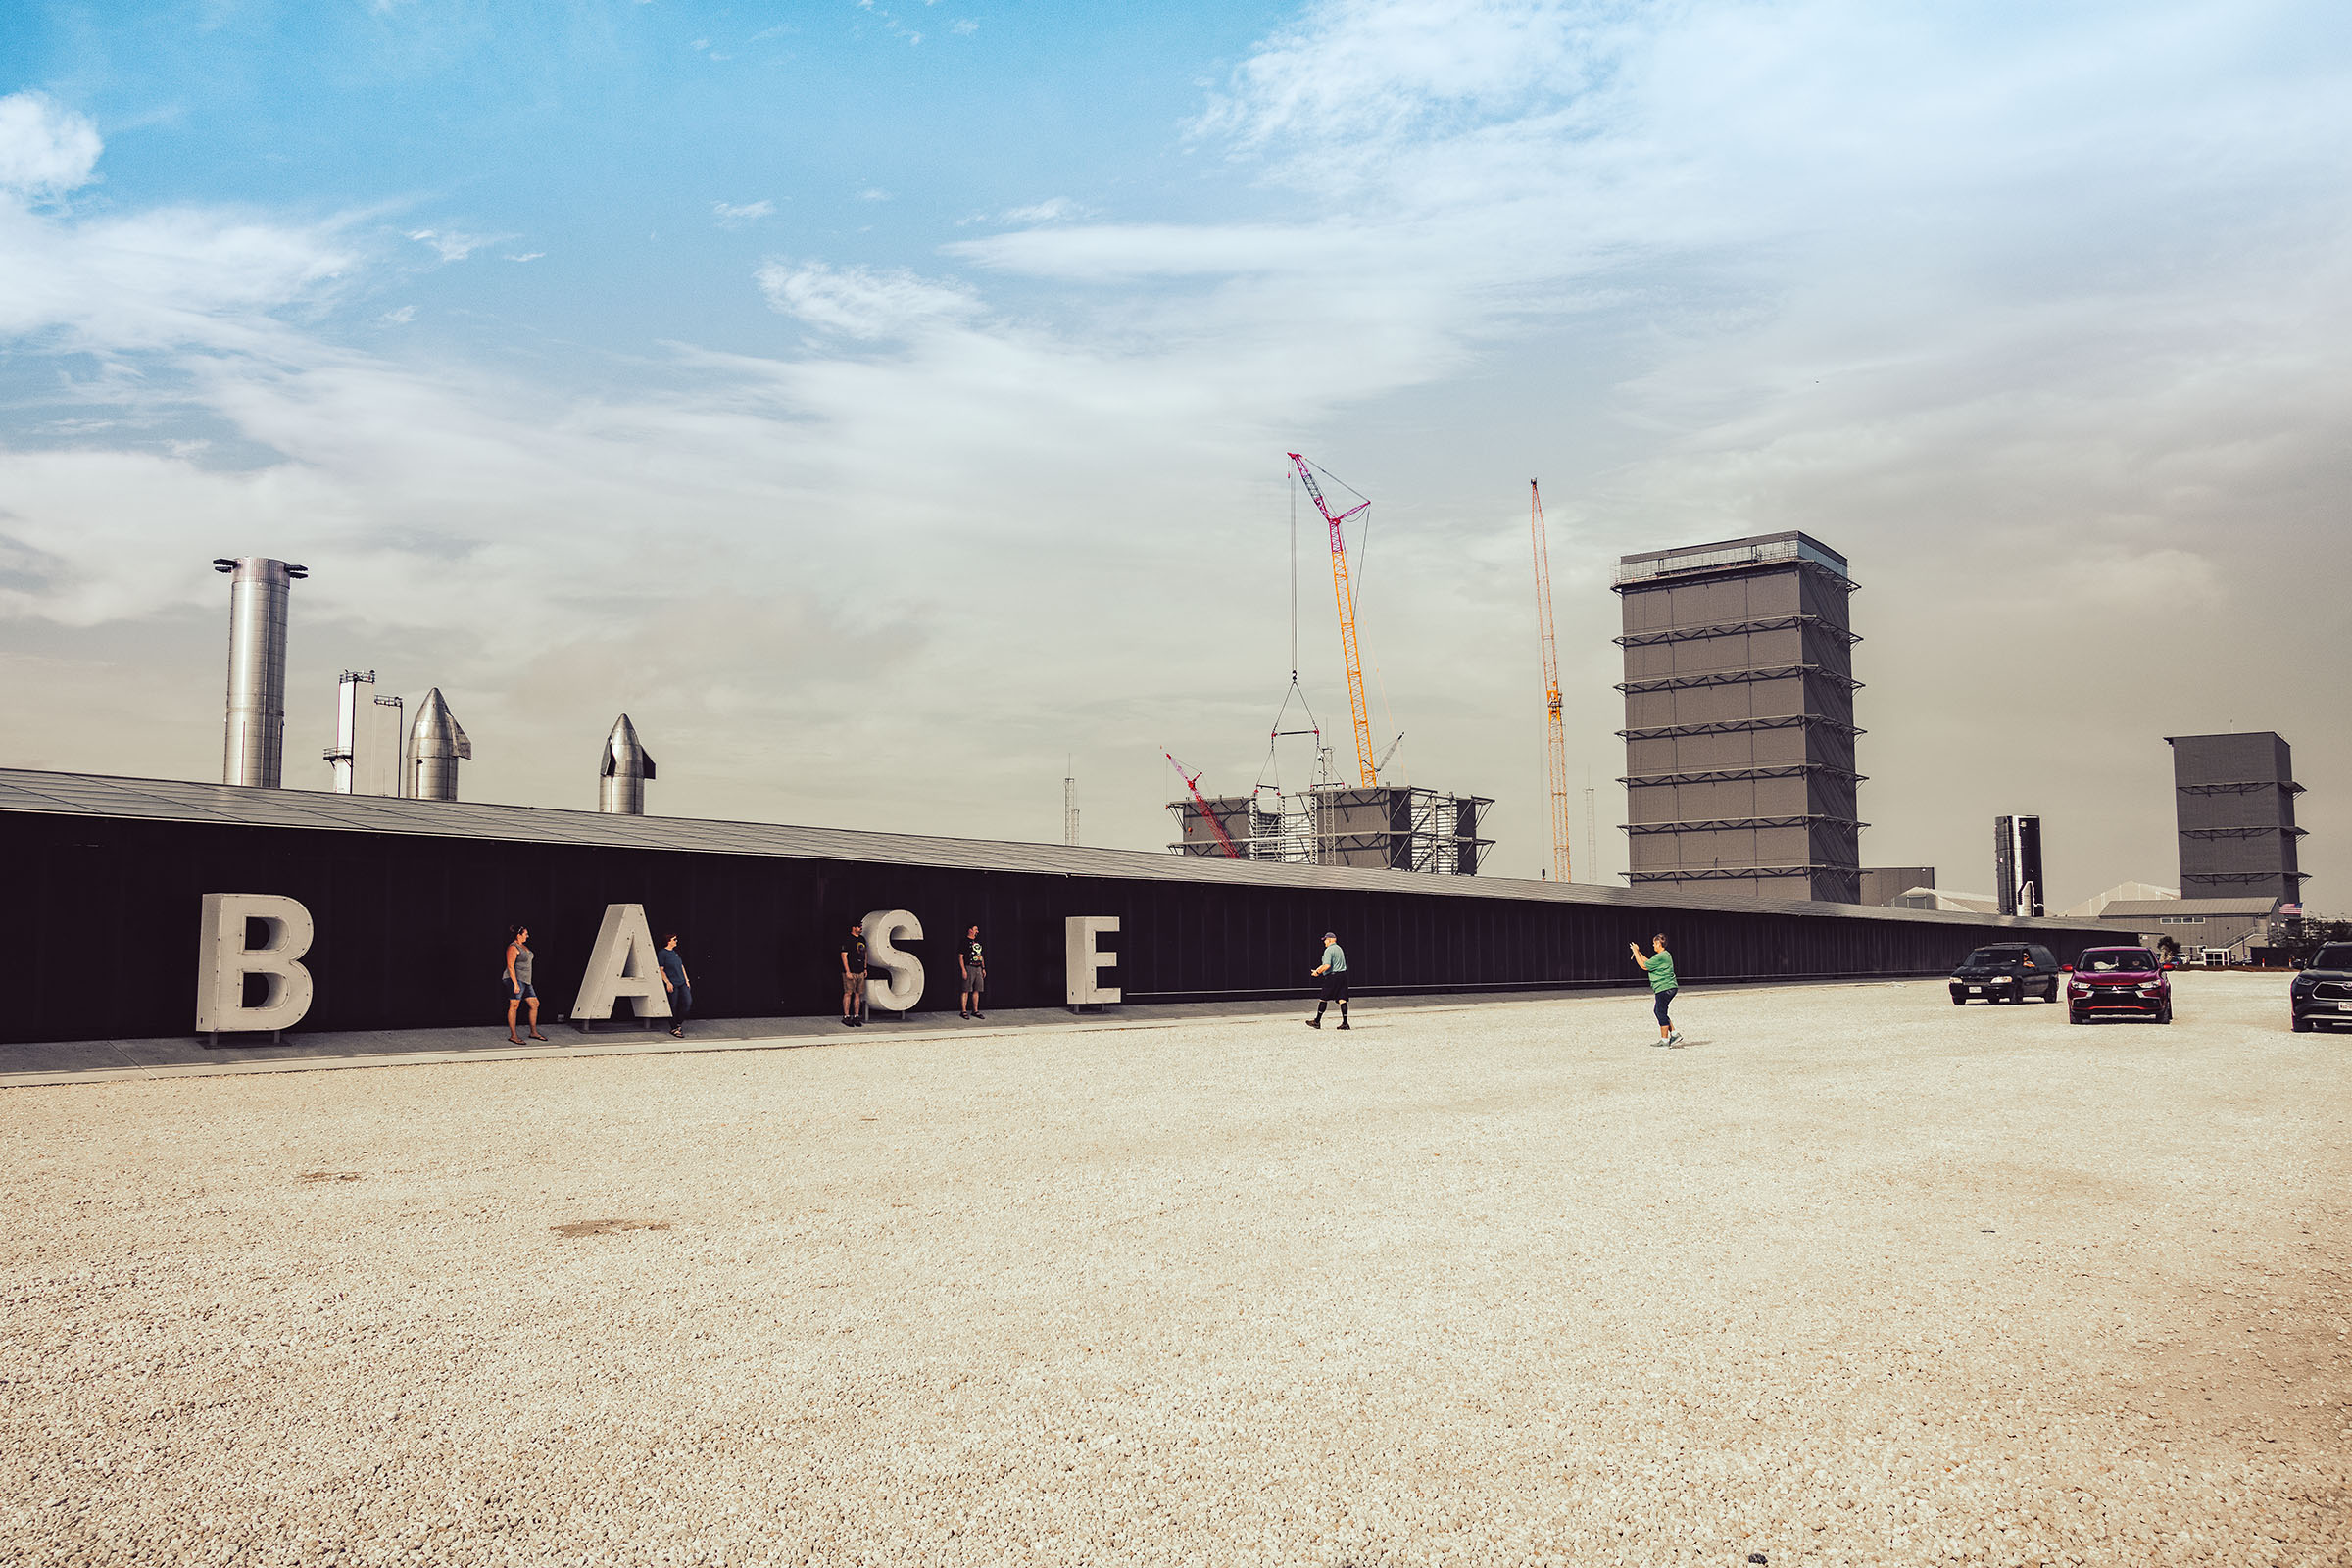 A small group of people pose in front of letters reading "BASE" with several tall cranes